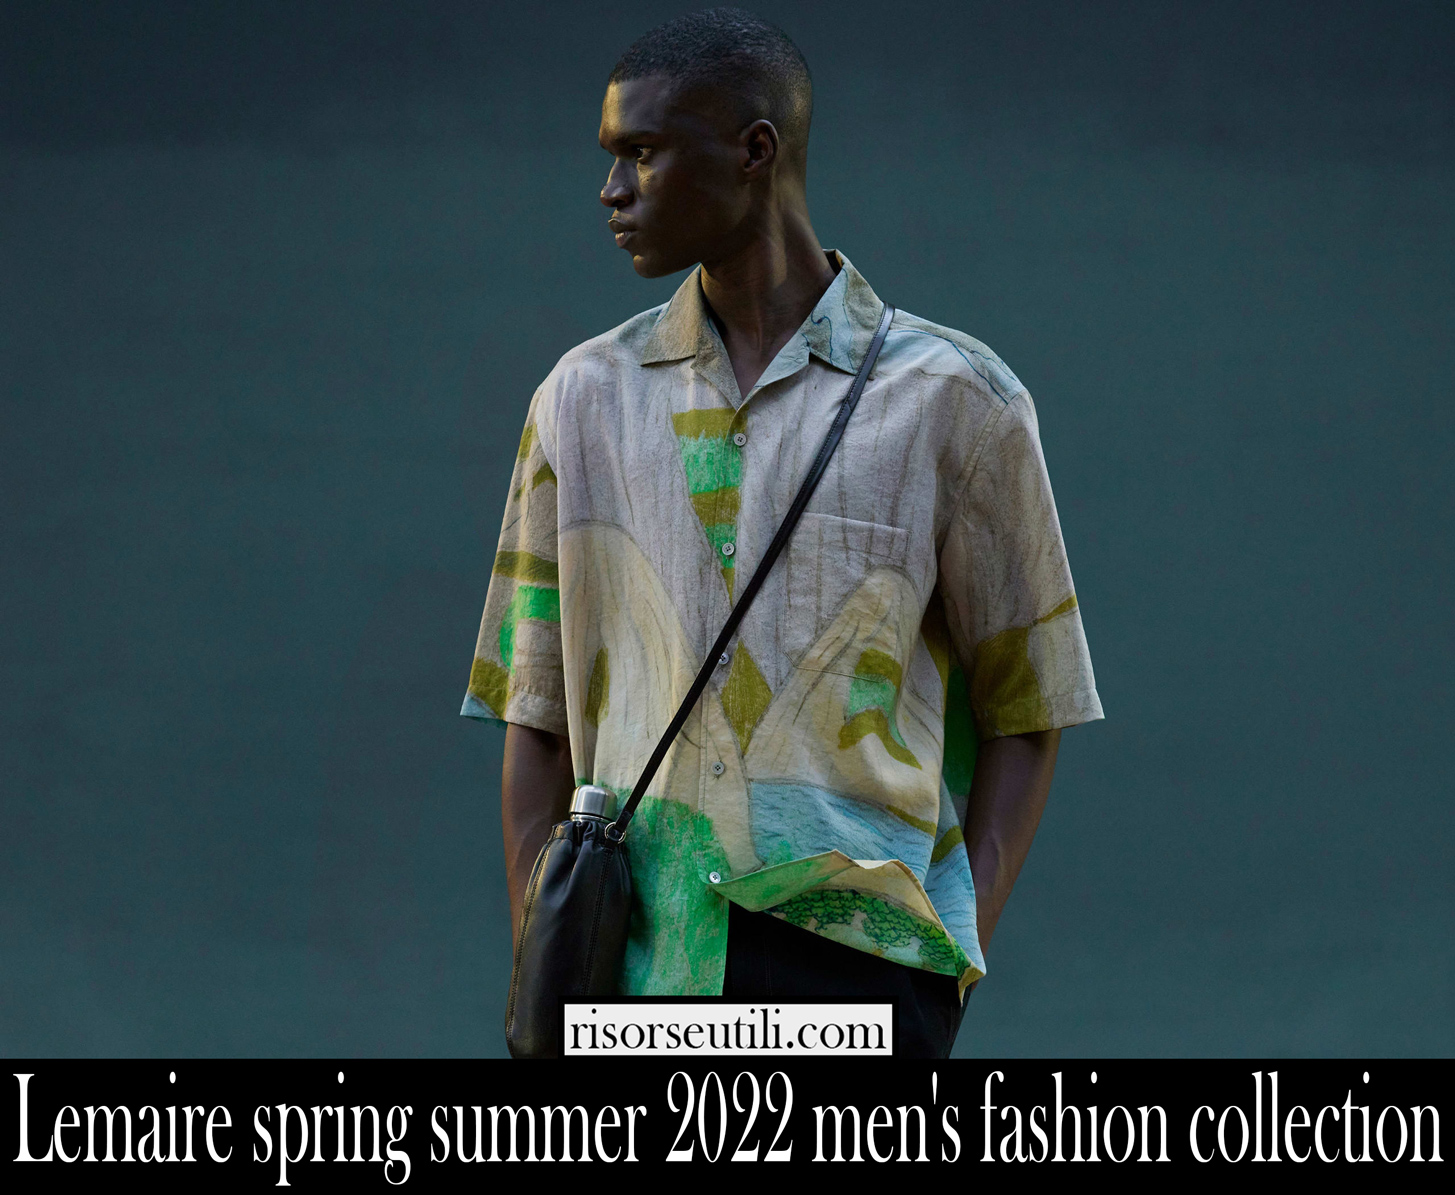 Lemaire spring summer 2022 mens fashion collection